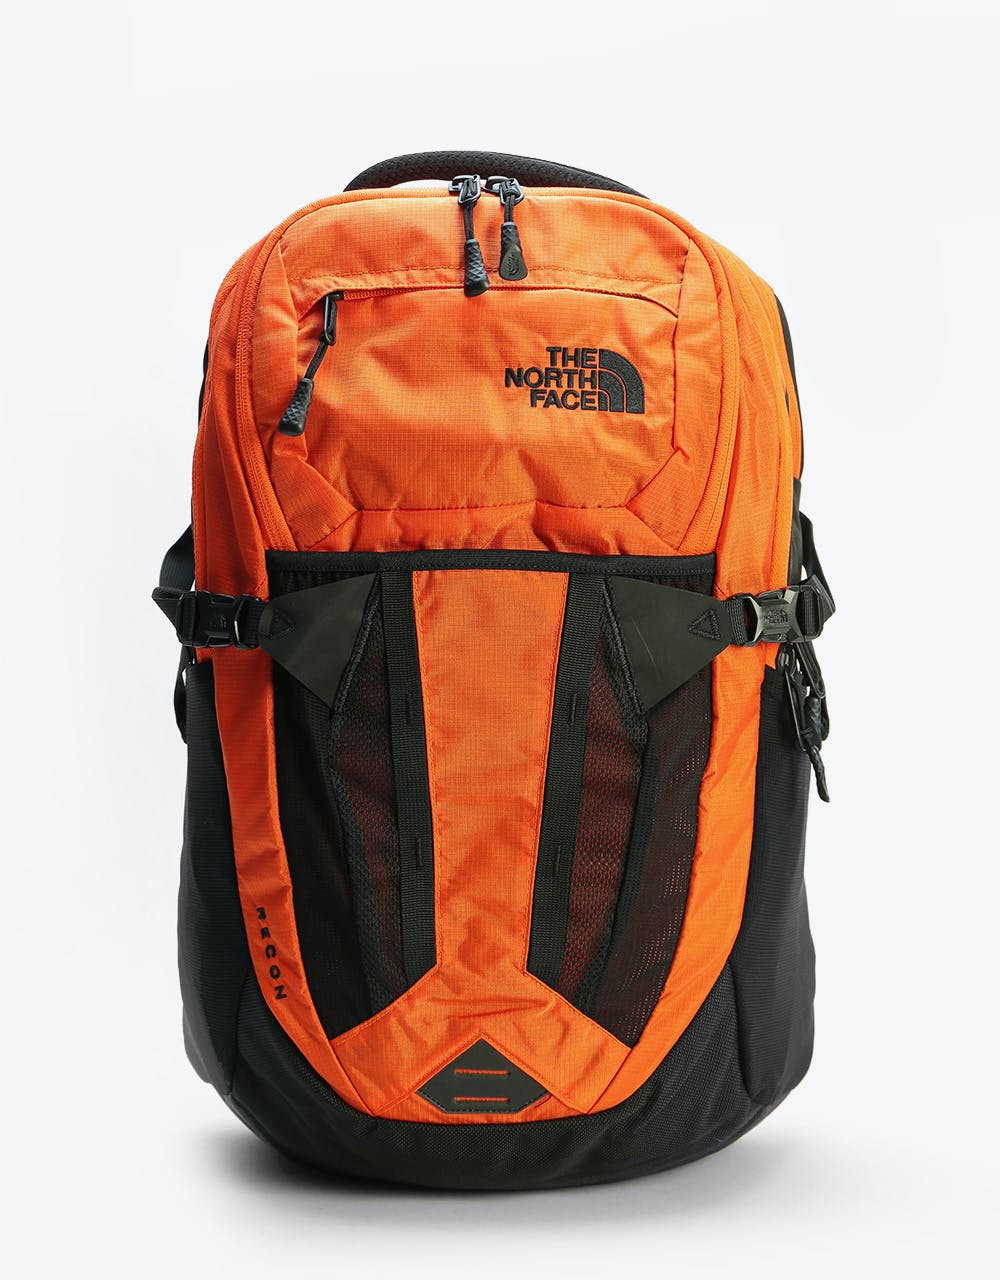 The North Face Recon Backpack Persian Orange Ripstop Tnf Black Route One